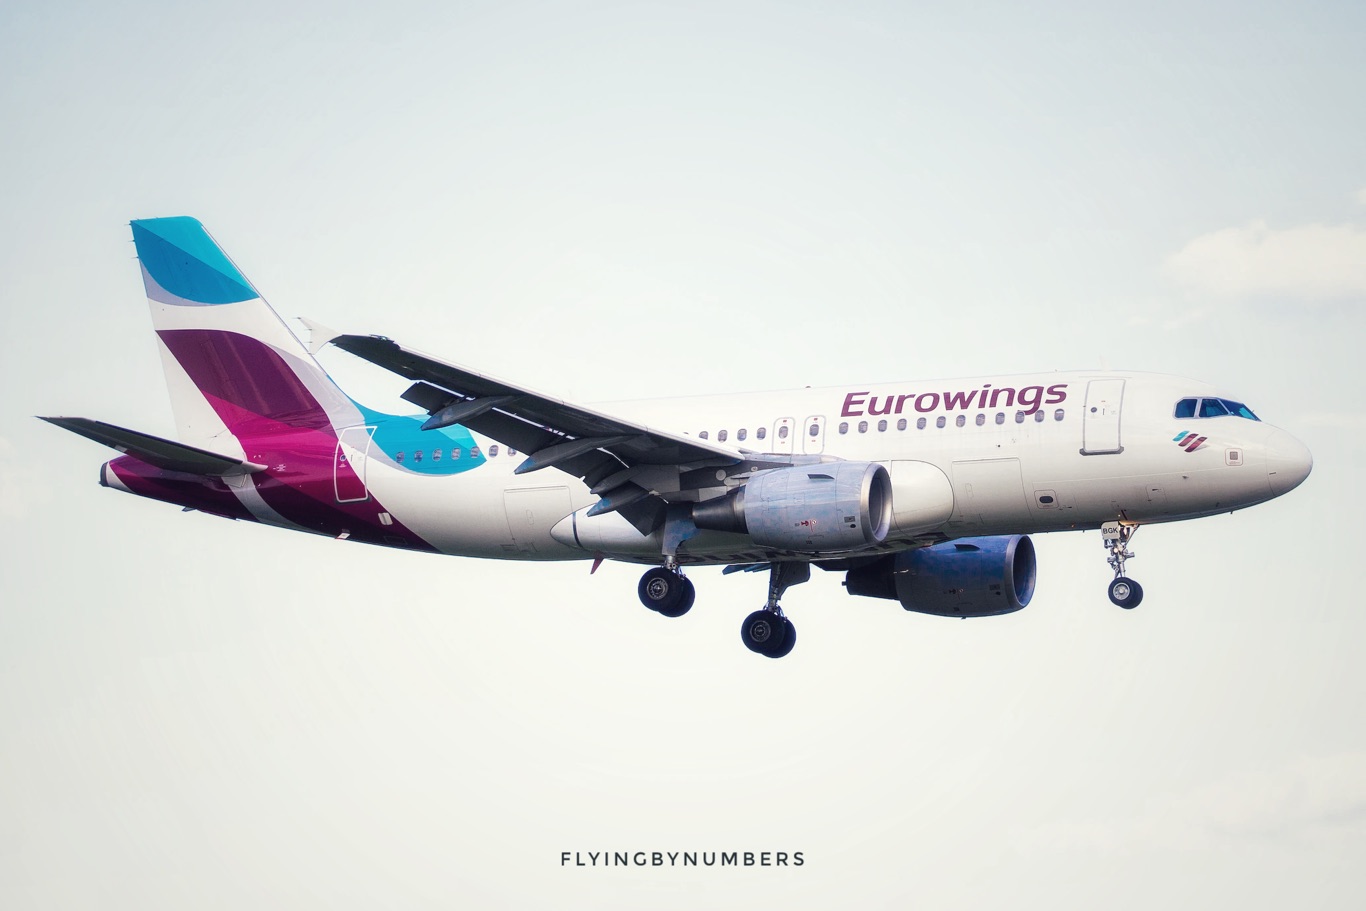 Eurowings aircraft rebranded after germanwings tragedy